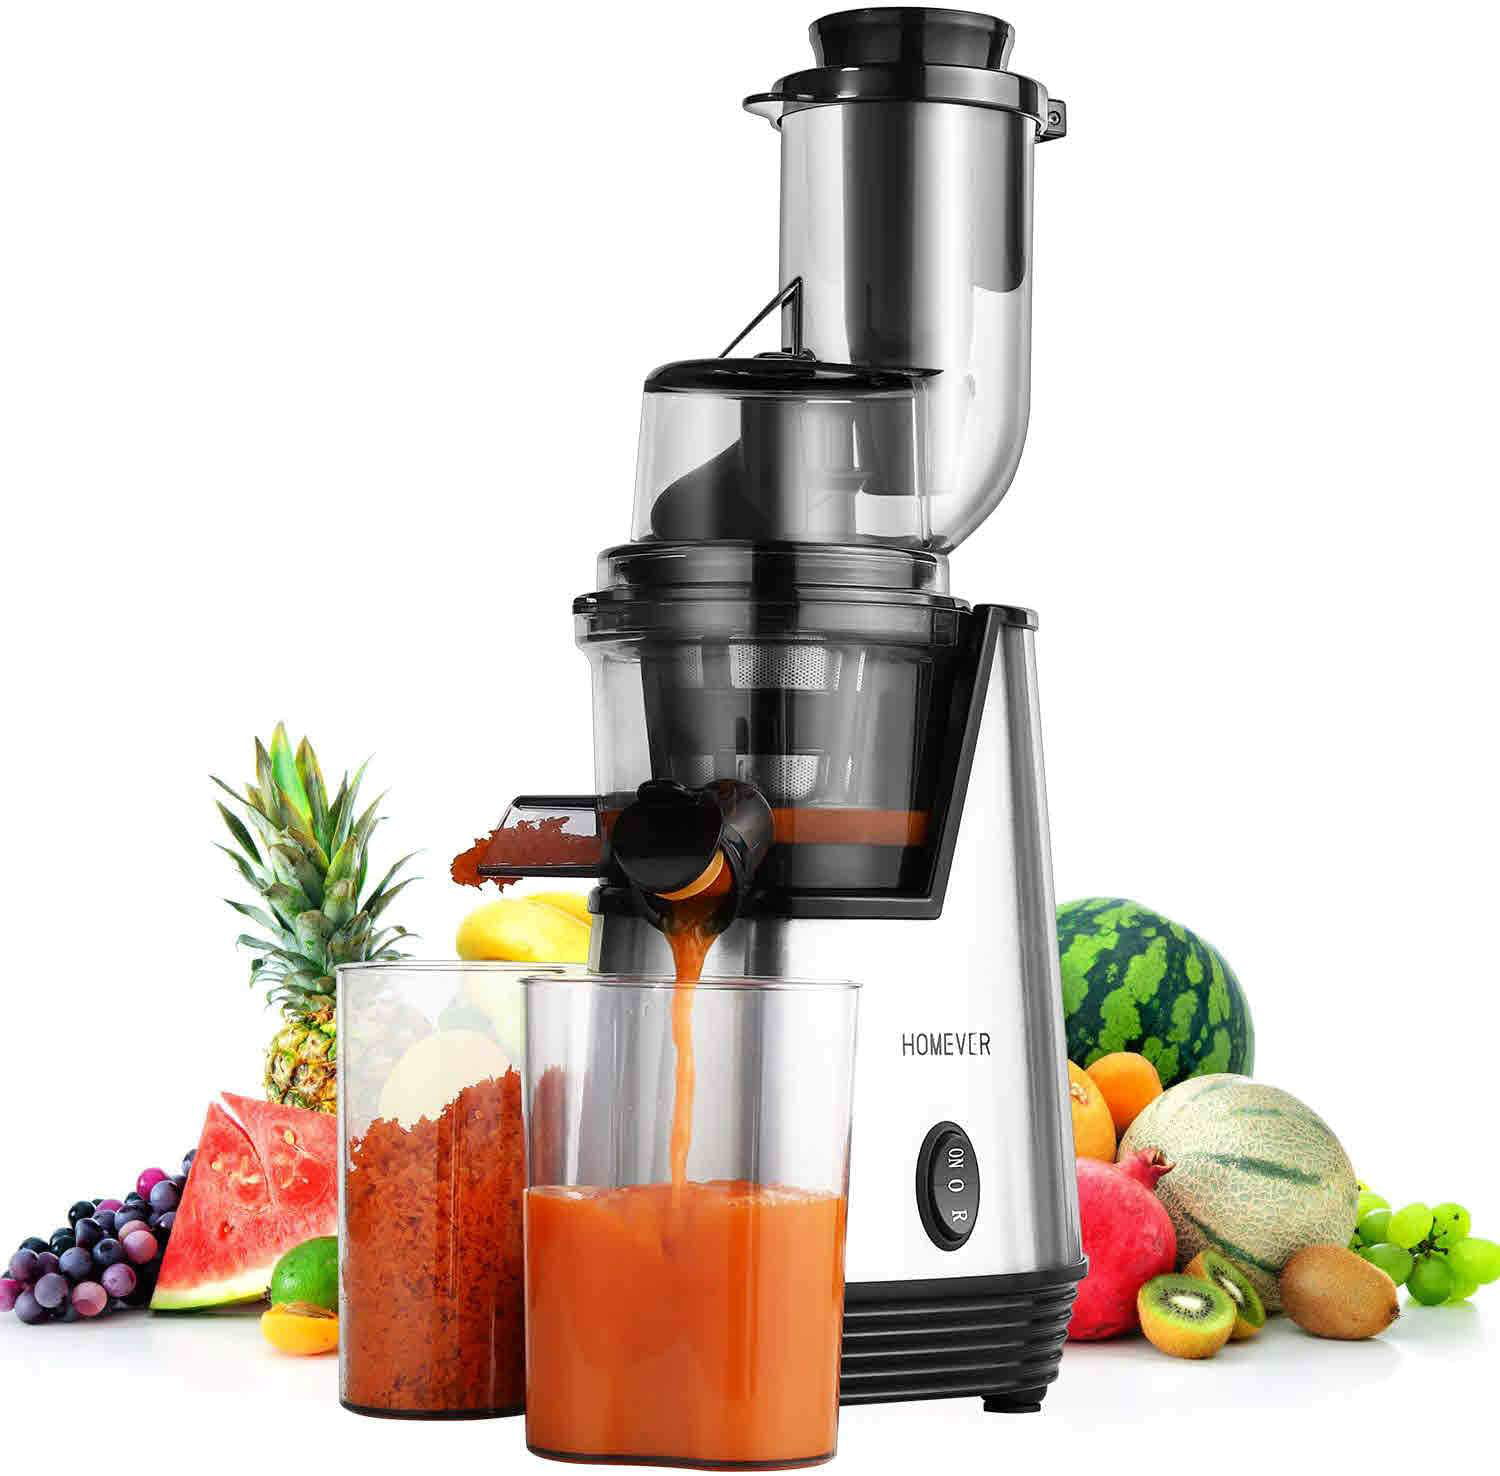 Quiet Motor and High Nutrition Juicers Easy to Clean Cold Press Juicer Energy Class A++ Homever Masticating Juicers Extractor for Whole Fruits and Vegetable Slow Juicer Machine